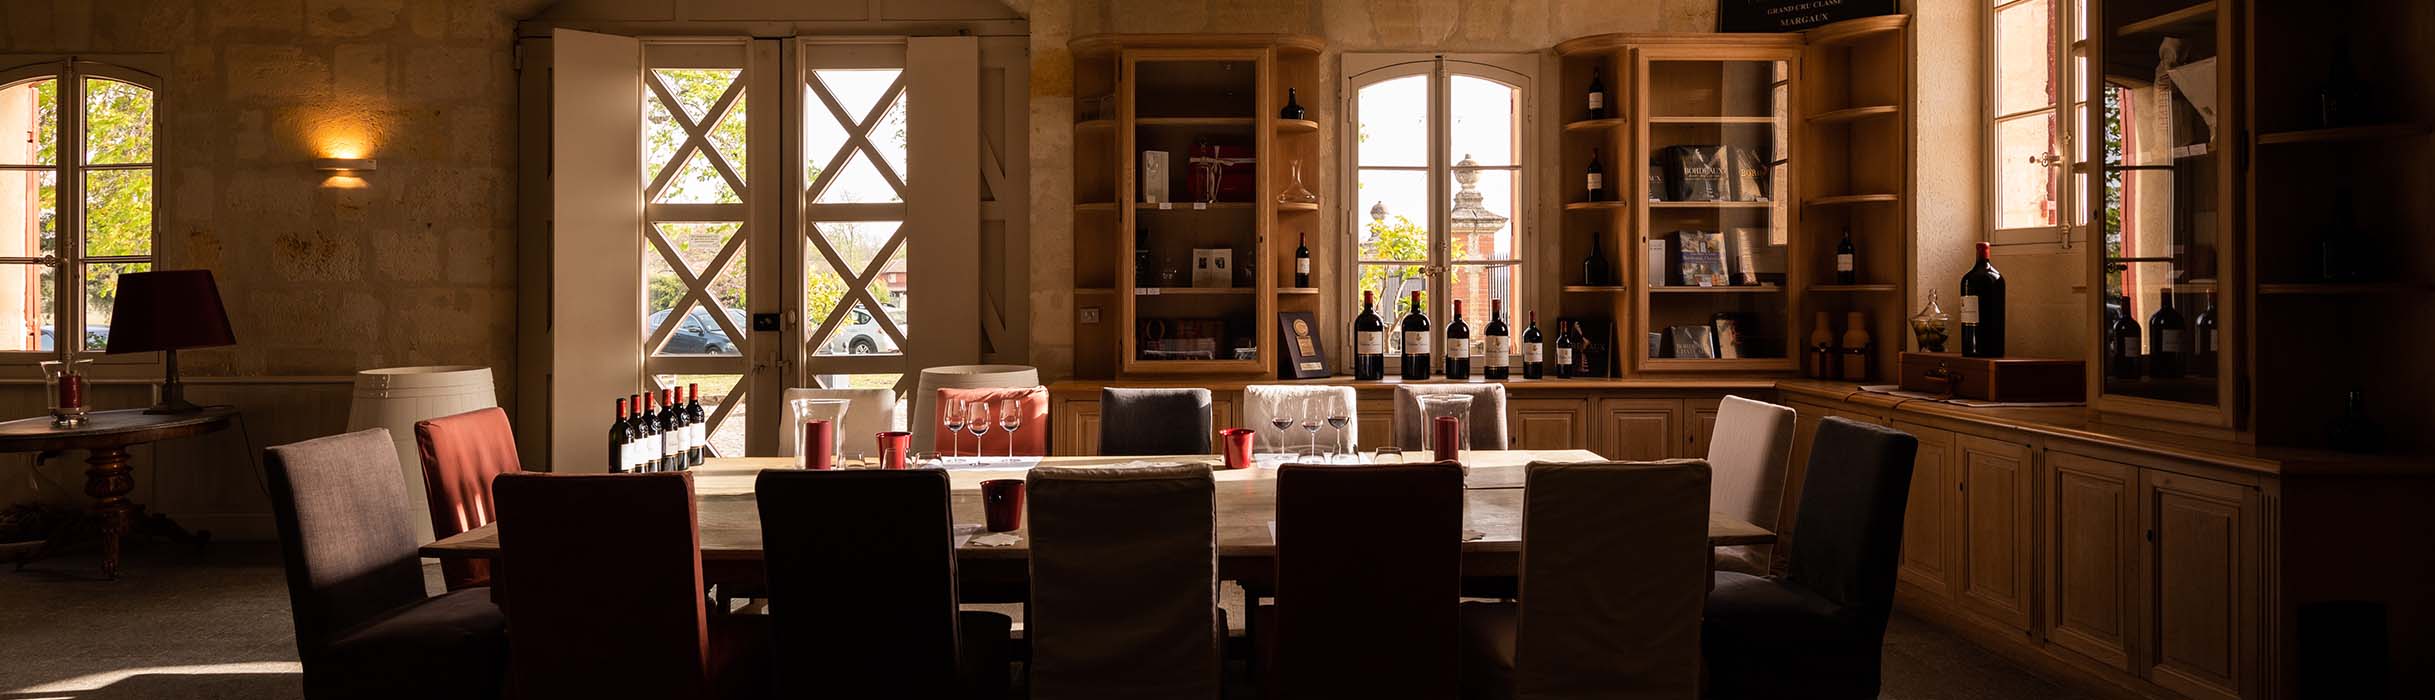 The Giscours tasting room